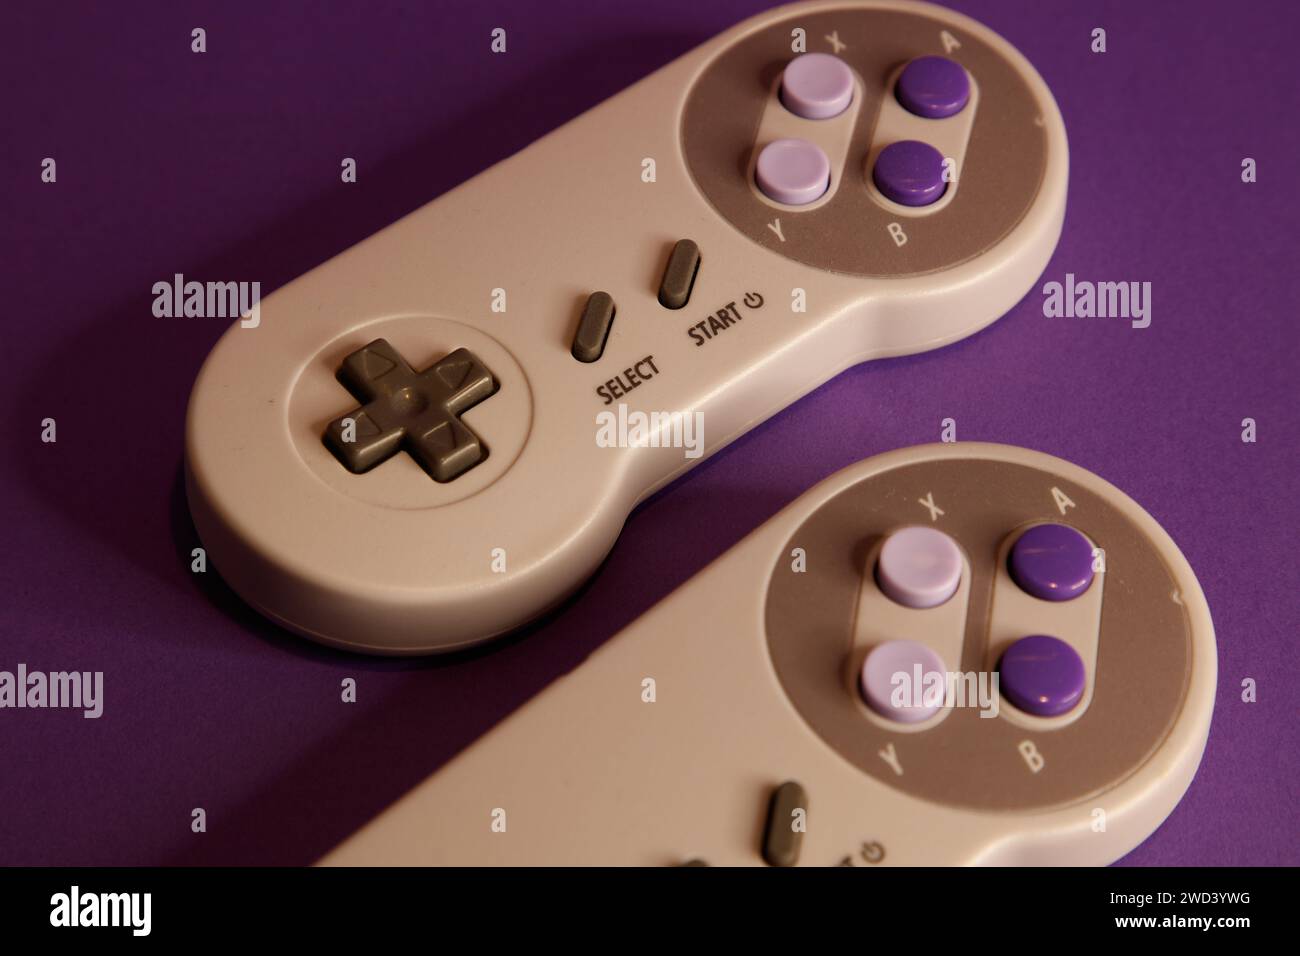 Nintendo type video game contollers on a mouve background, studio photography Stock Photo